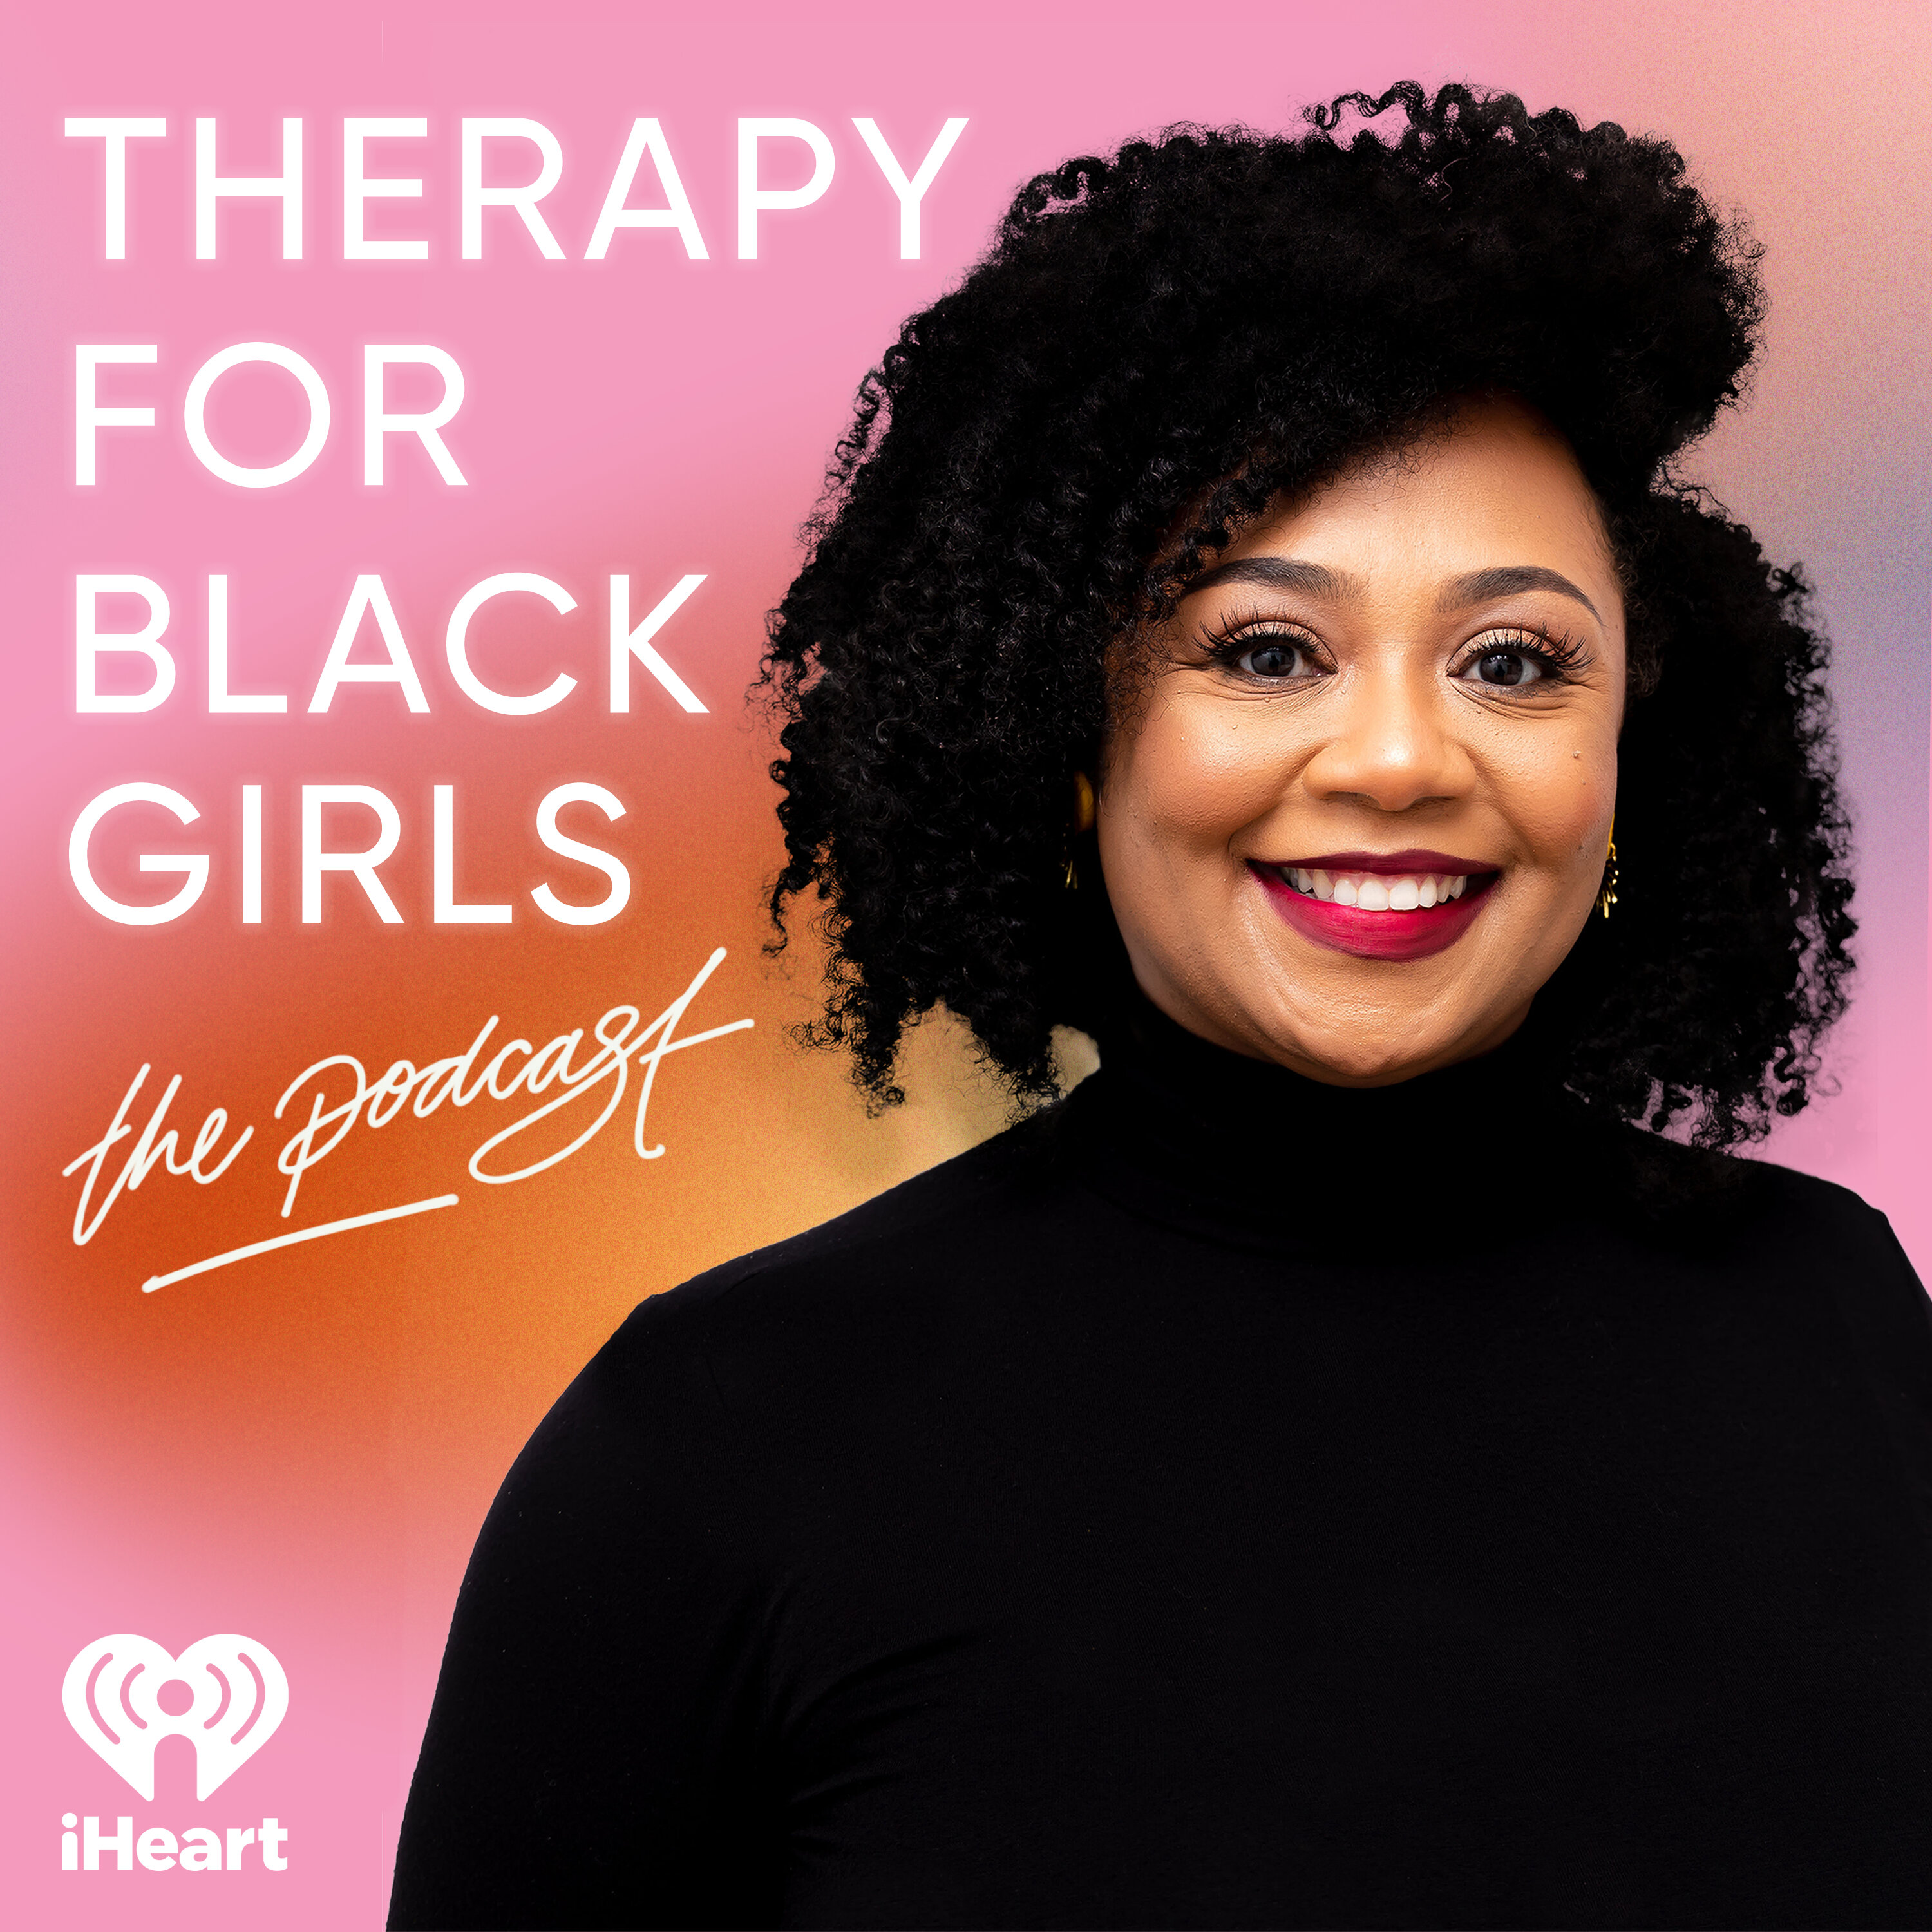 Therapy for Black Girls - Session 266: Am I My Therapist&#x27;s Favorite Client? And Other Things You Might Be Wondering